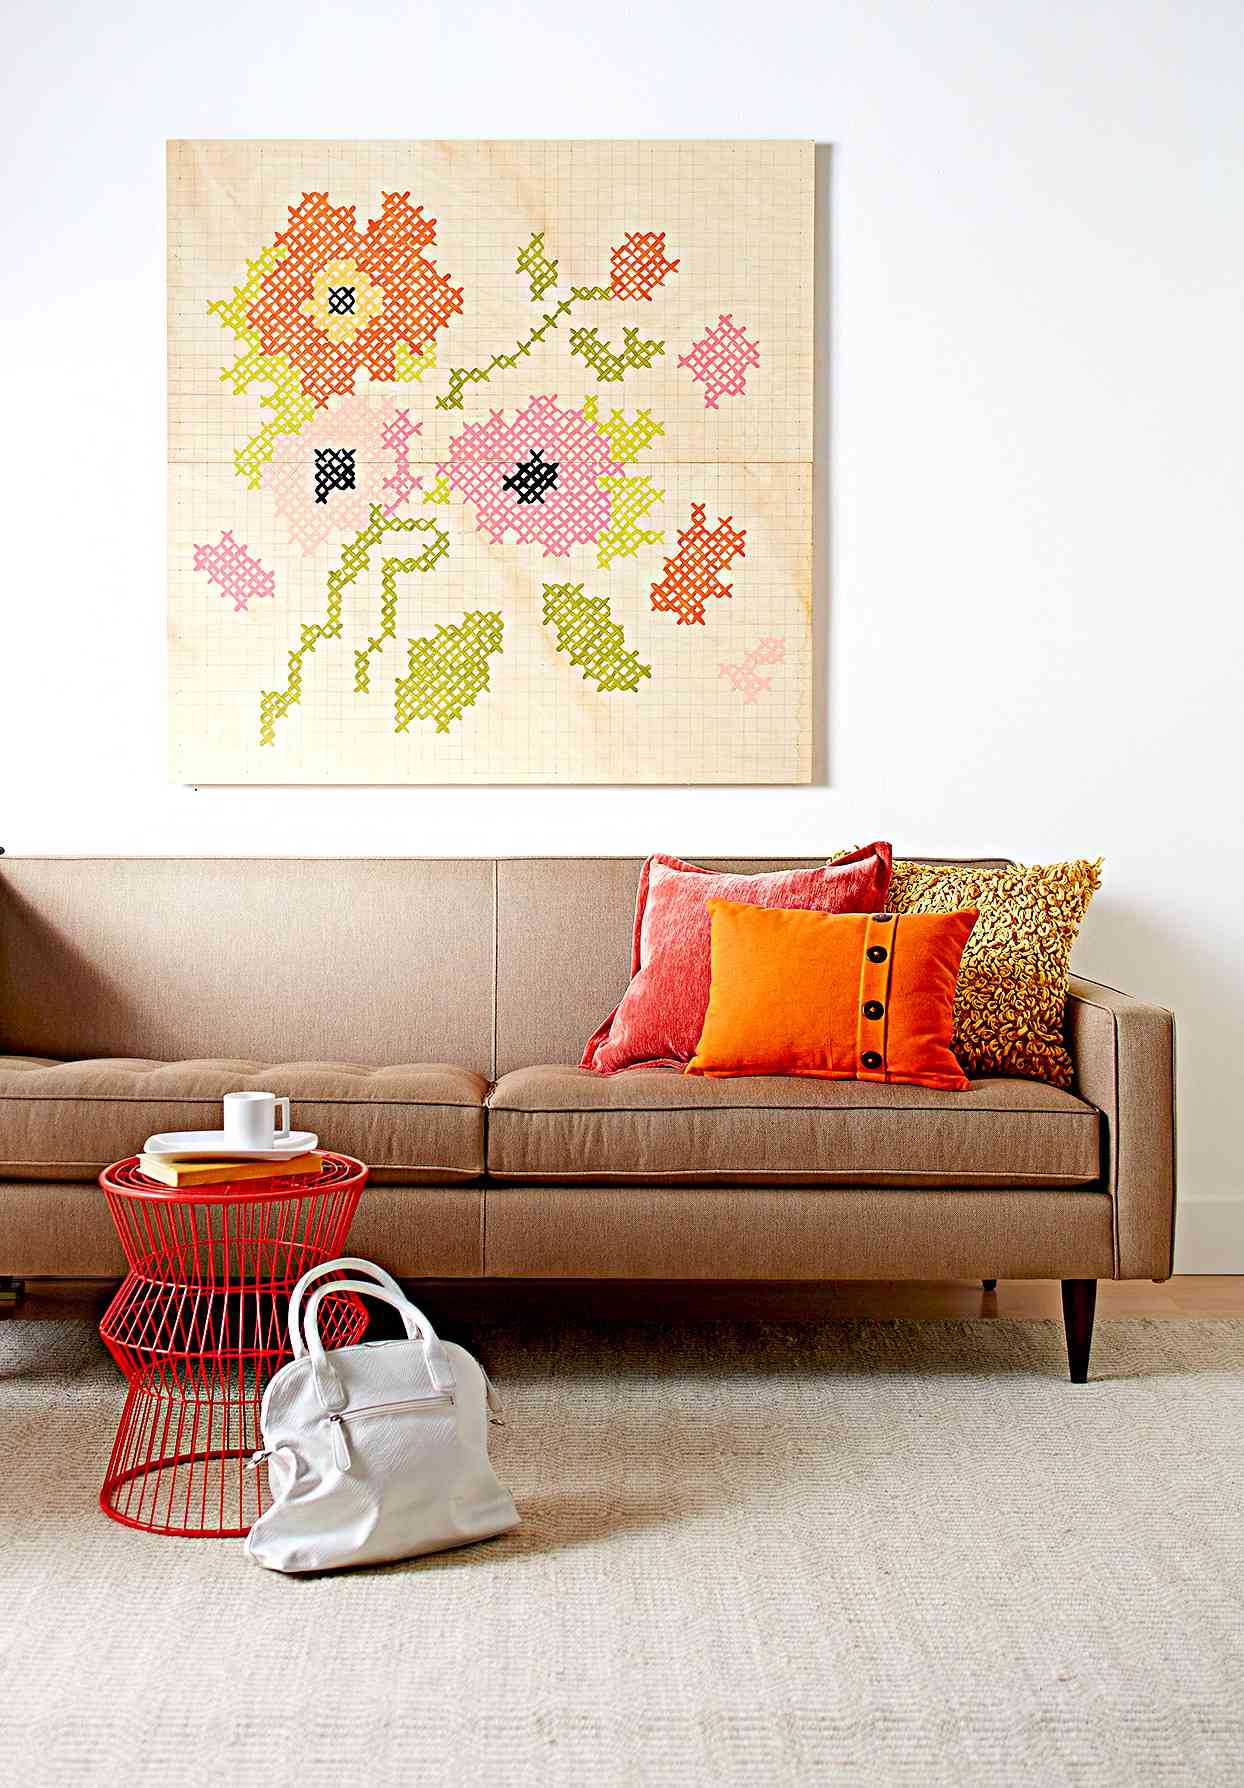 Seating area with embroidery wall art